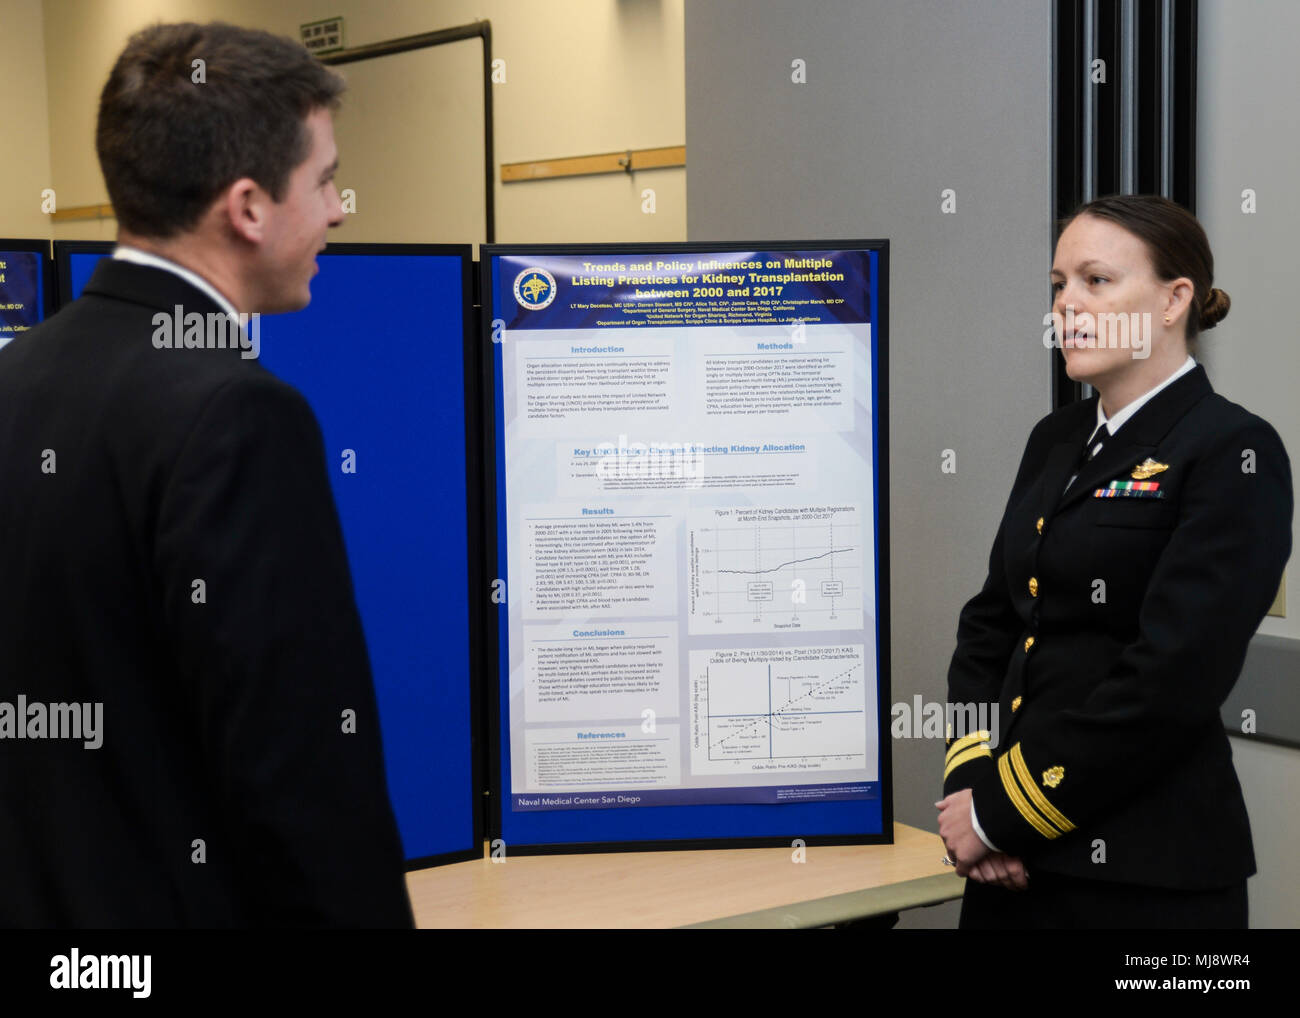 180420-N-PN275-1019 SAN DIEGO (April 20, 2018)  Lt. Mary Decoteau, a general surgery resident at Naval Medical Center San Diego, discusses her presentation with another physician  at the 33rd annual Academic Research Competition. The competition lets residents and doctors to competitively showcase their research with speeches and board displays.(U.S. Navy Photo by Mass Communication Specialist 2nd Class Zachary Kreitzer) Stock Photo